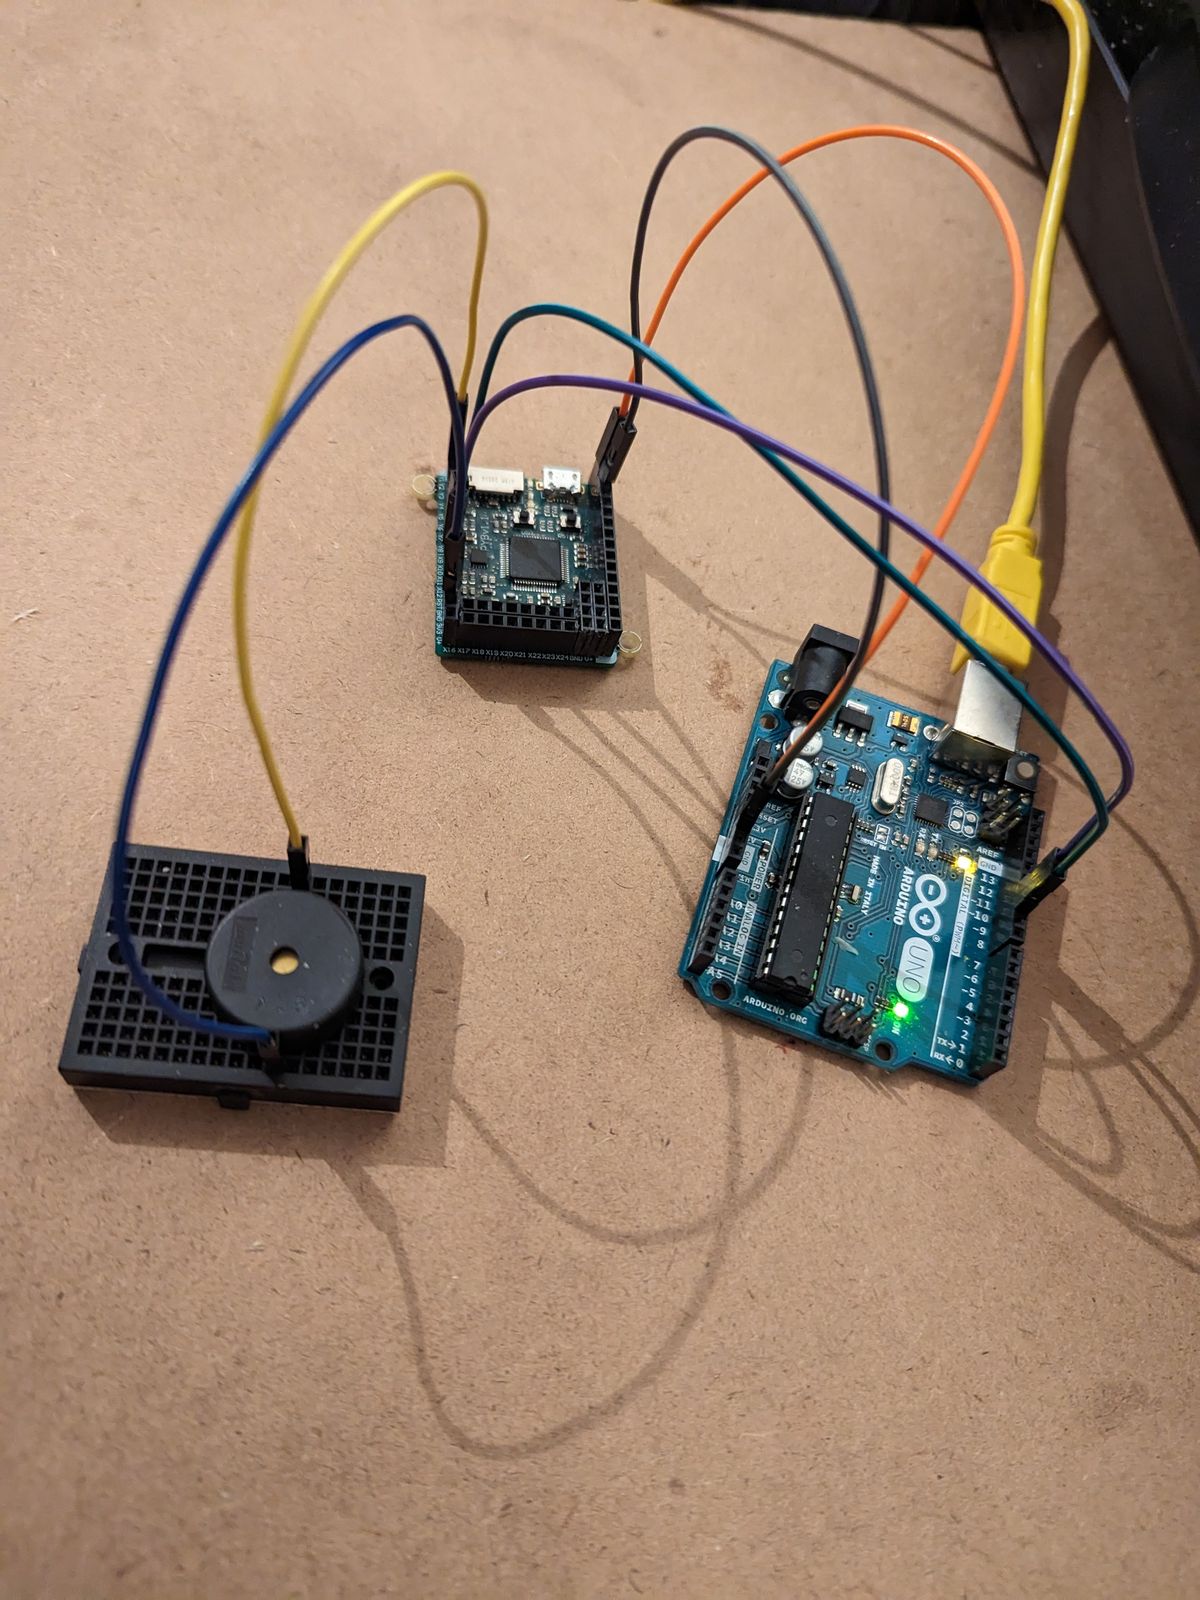 Simple UART Project Using pyboard and Arduino Uno